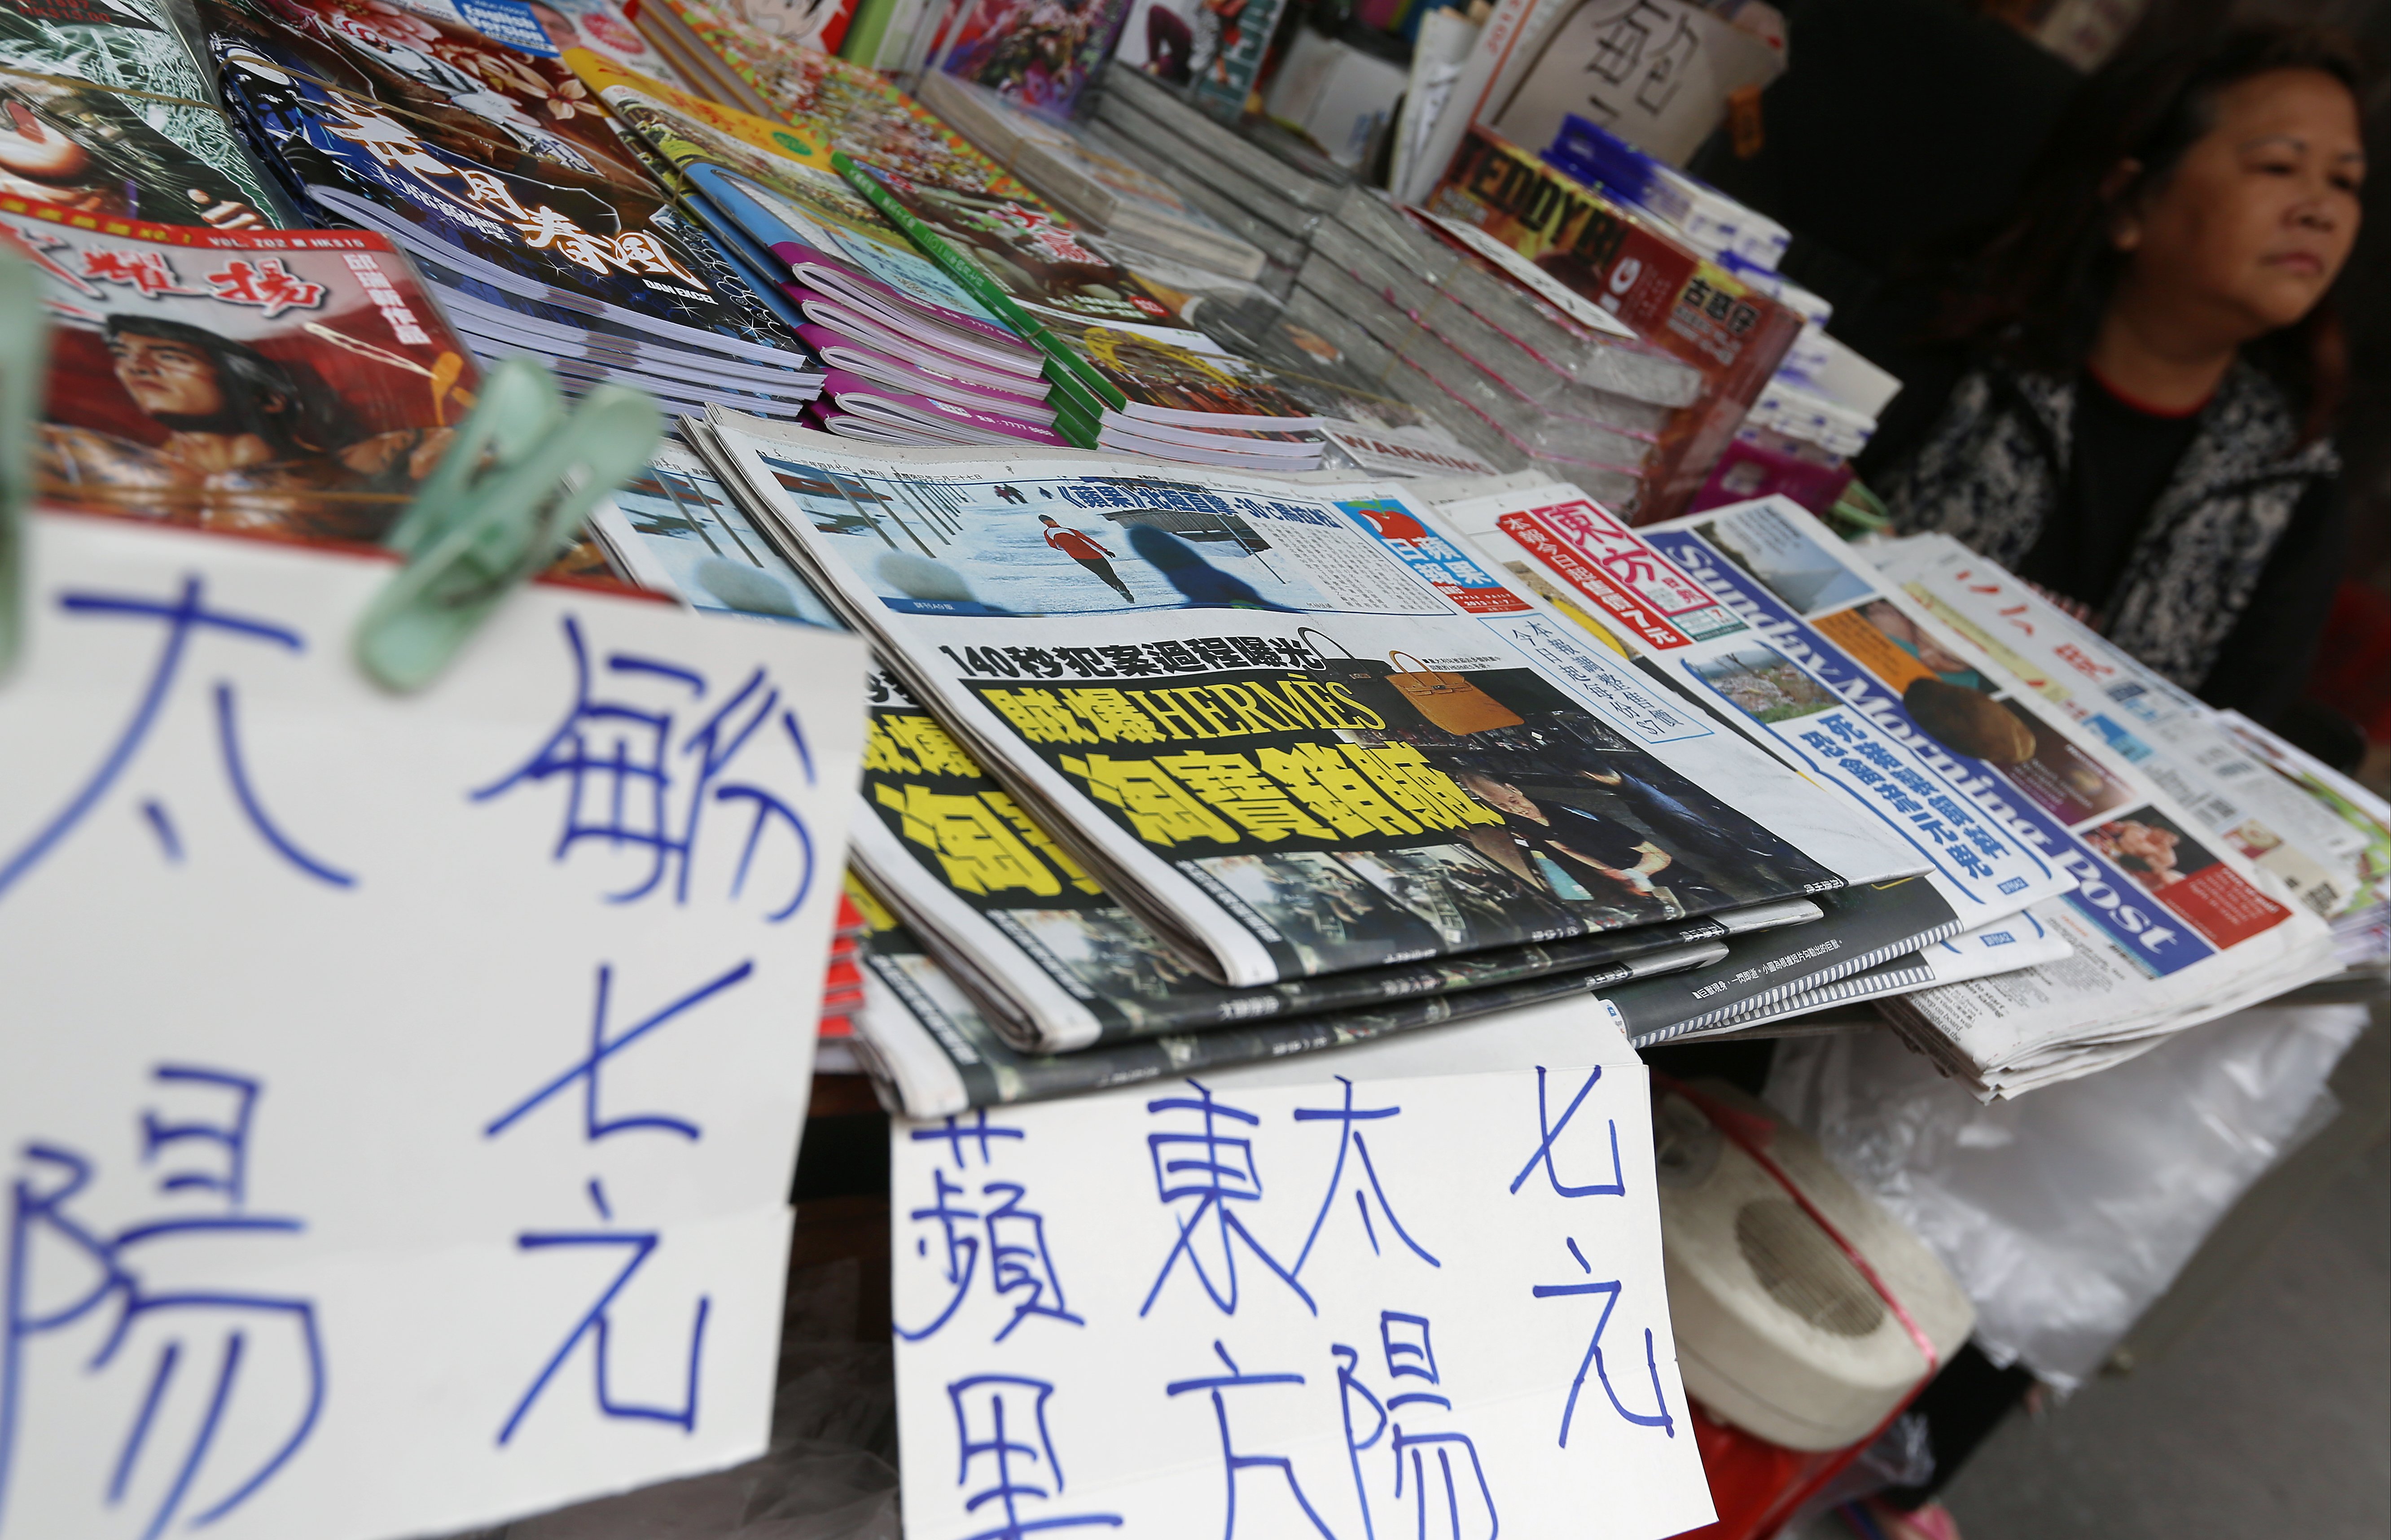 A news stand in Hong Kong selling the day's papers. Photo: Sam Tsang